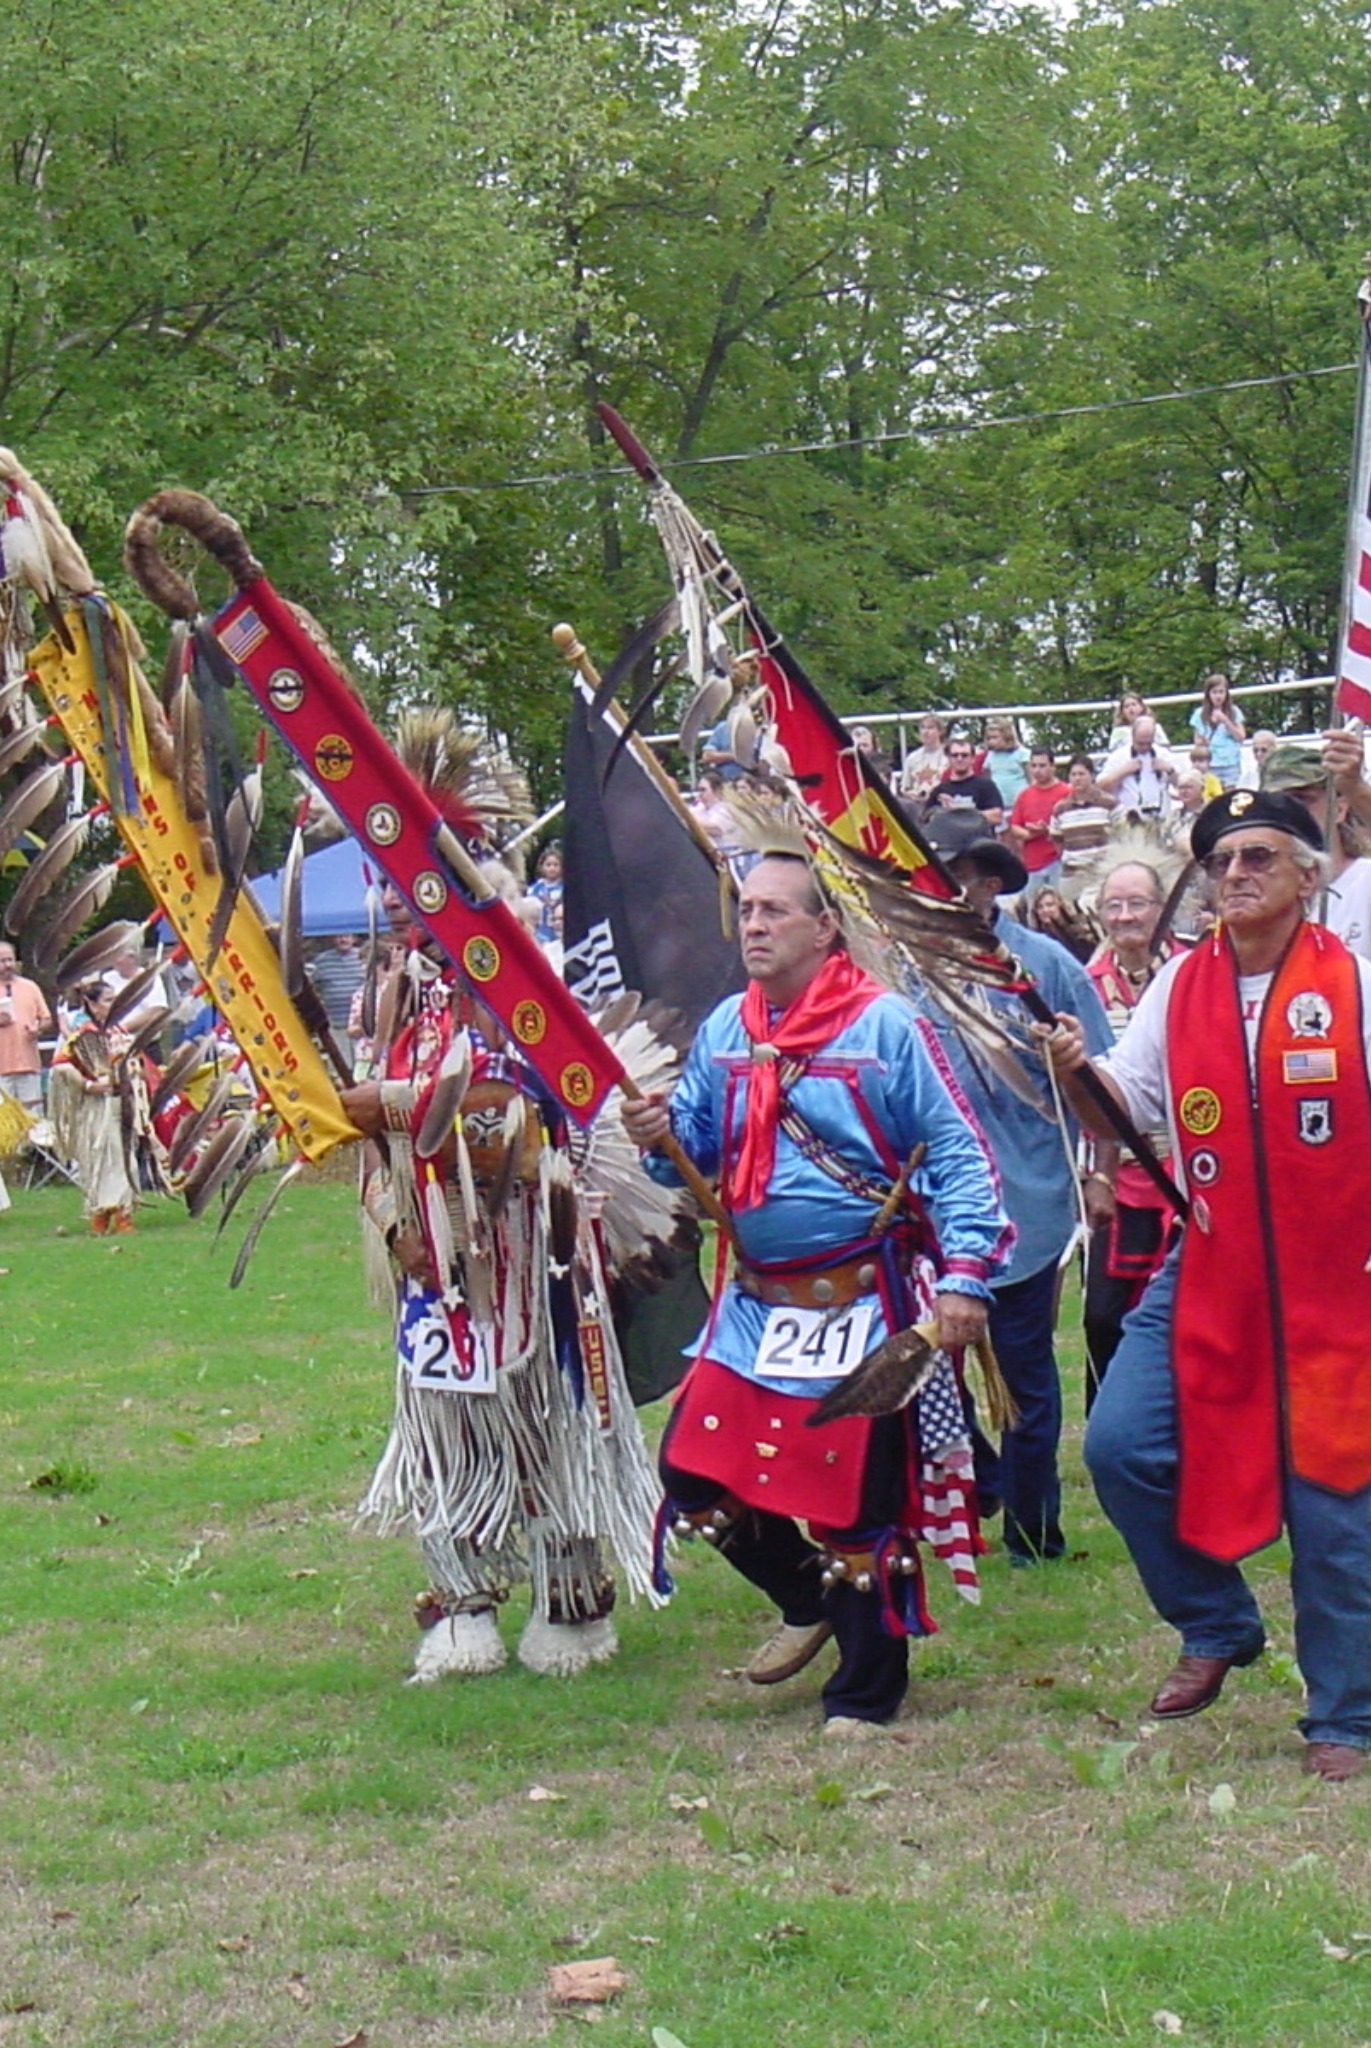 Keith Little Badger participates in Powwow Grand Entry with Veterans